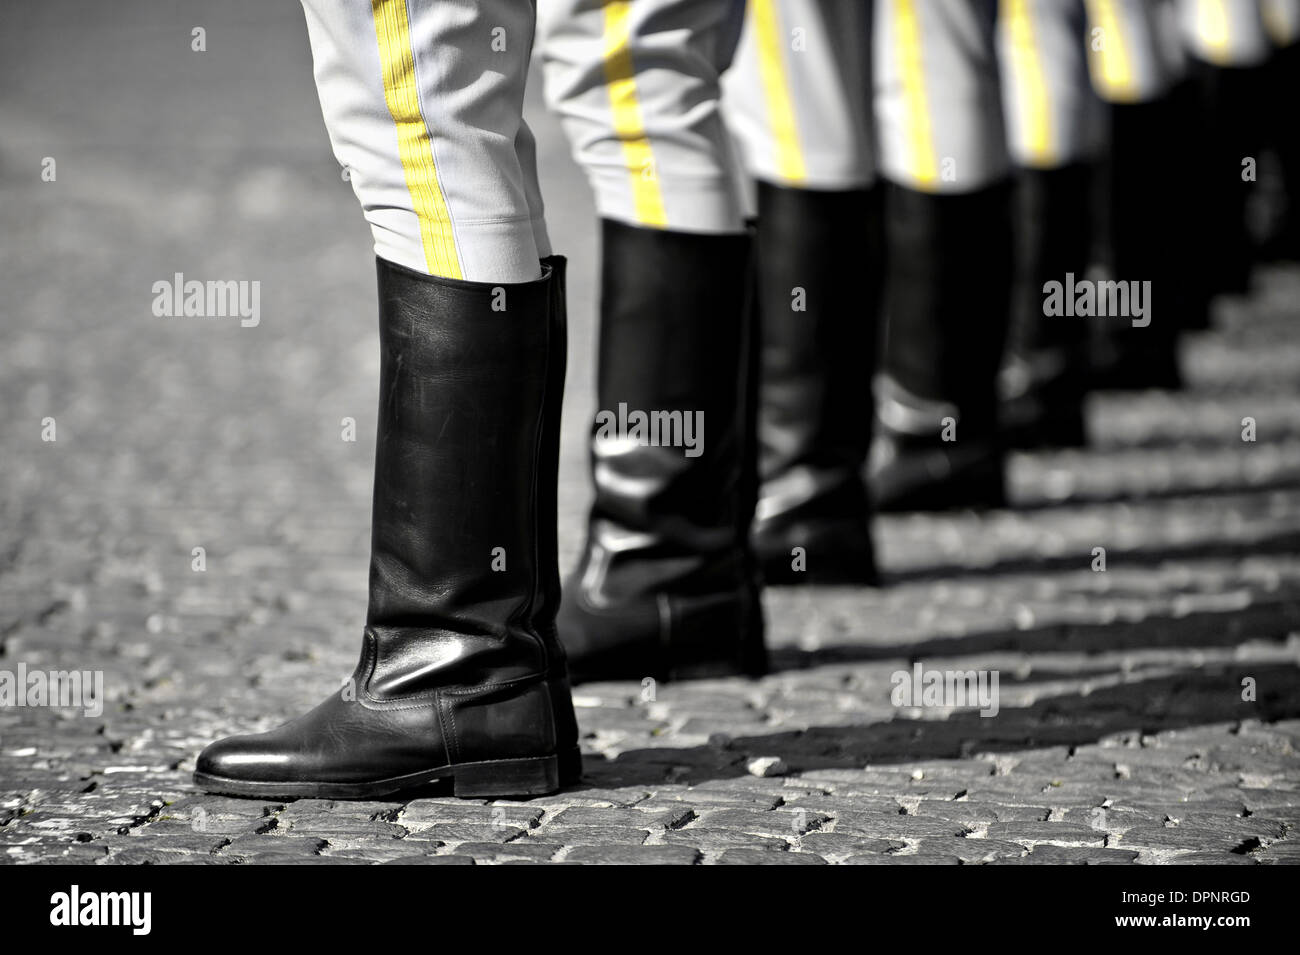 Soldiers boots in rest position during a military parade Stock Photo